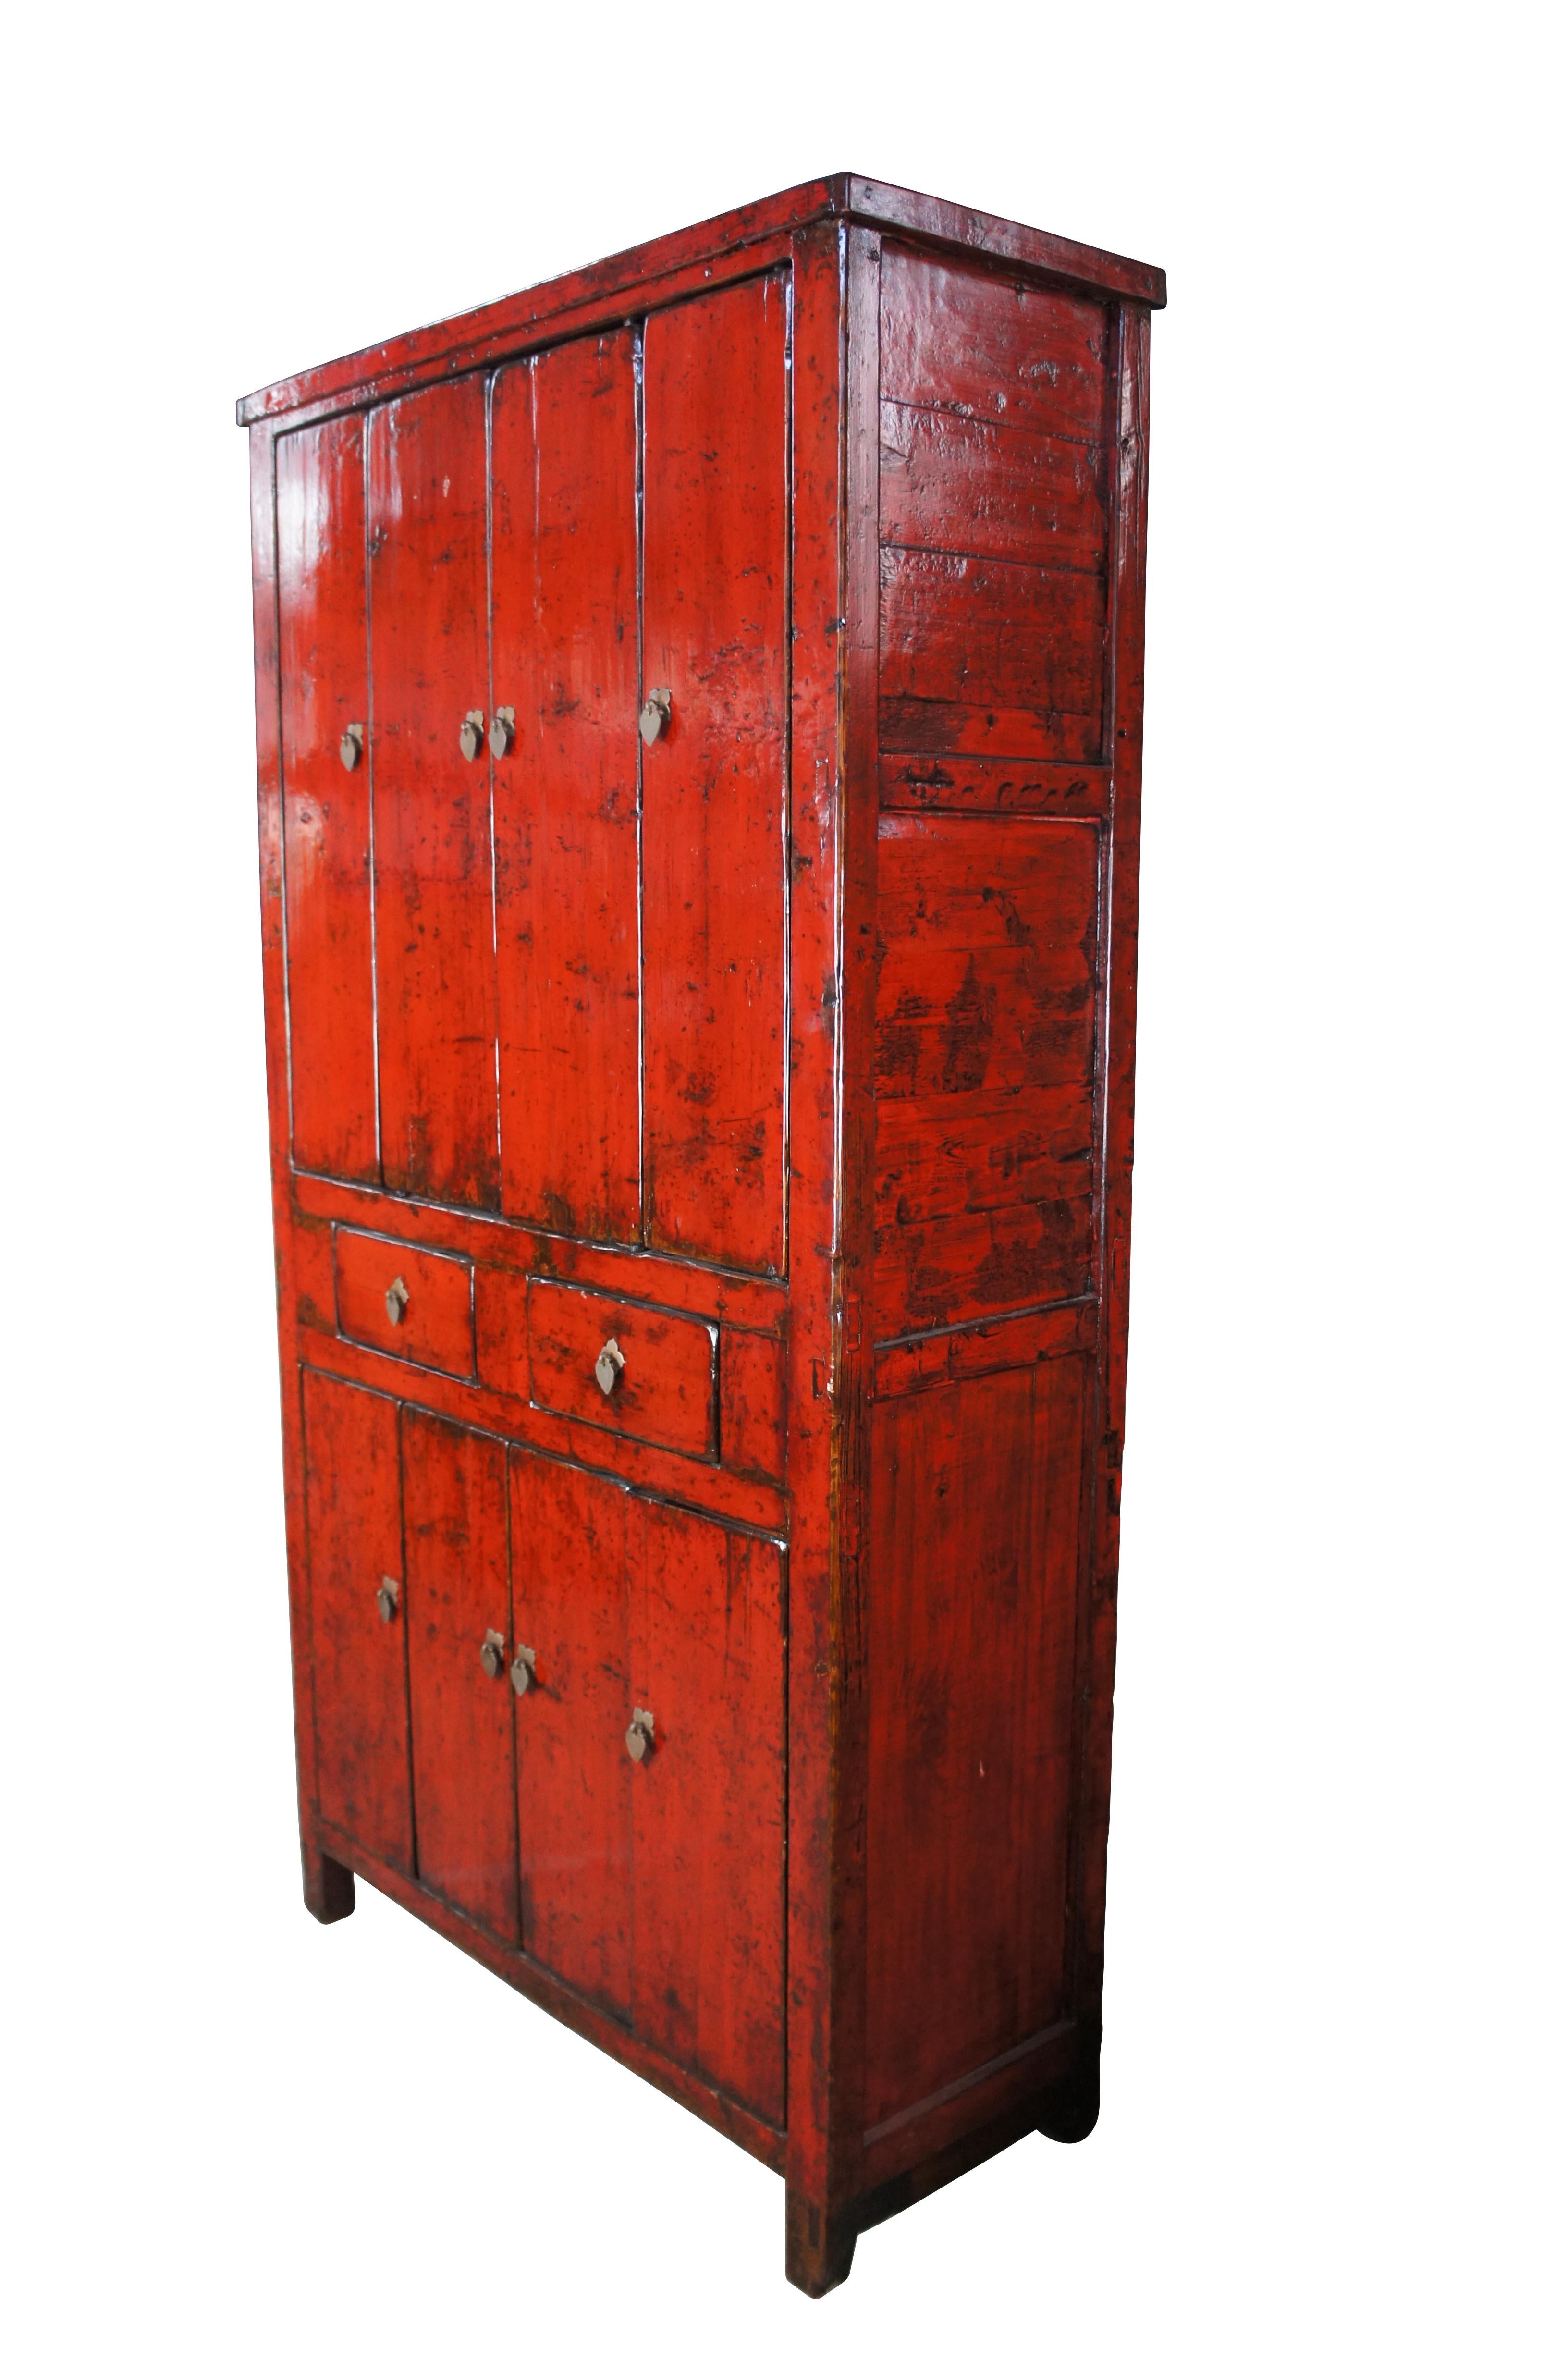 Monumental antique red lacquer Northern Chinese armoire, circa 1870s.  The cabinets large stature sets it apart giving off a very stately vibe.  Made from elm with an exquisite patina.  Features two central drawers and an upper and lower cabinet